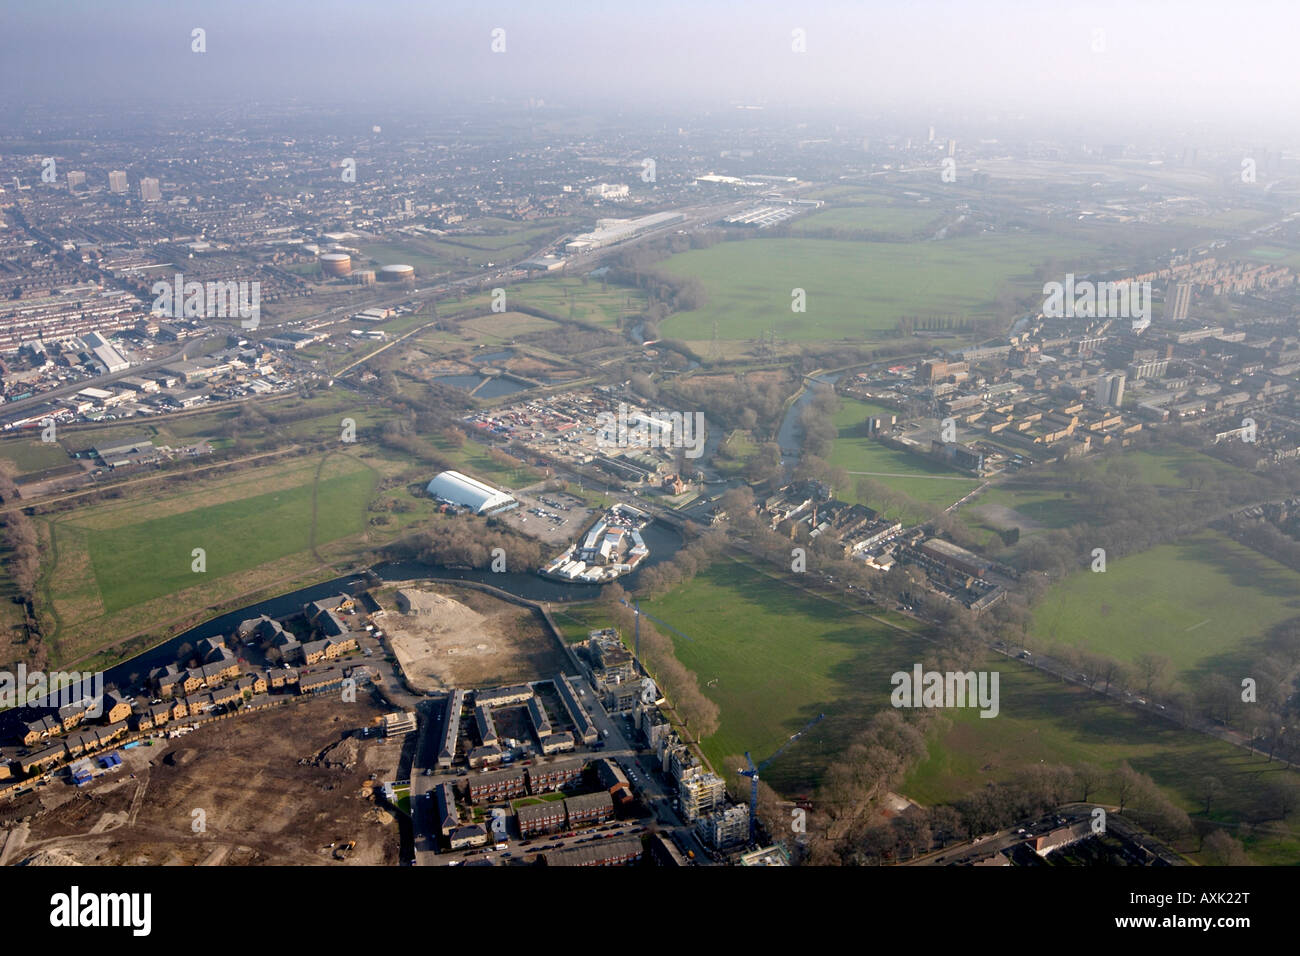 High level oblique aerial view south east of North Millfields Lea Bridge Hackney Marshes London E5 England UK January 2006 Stock Photo